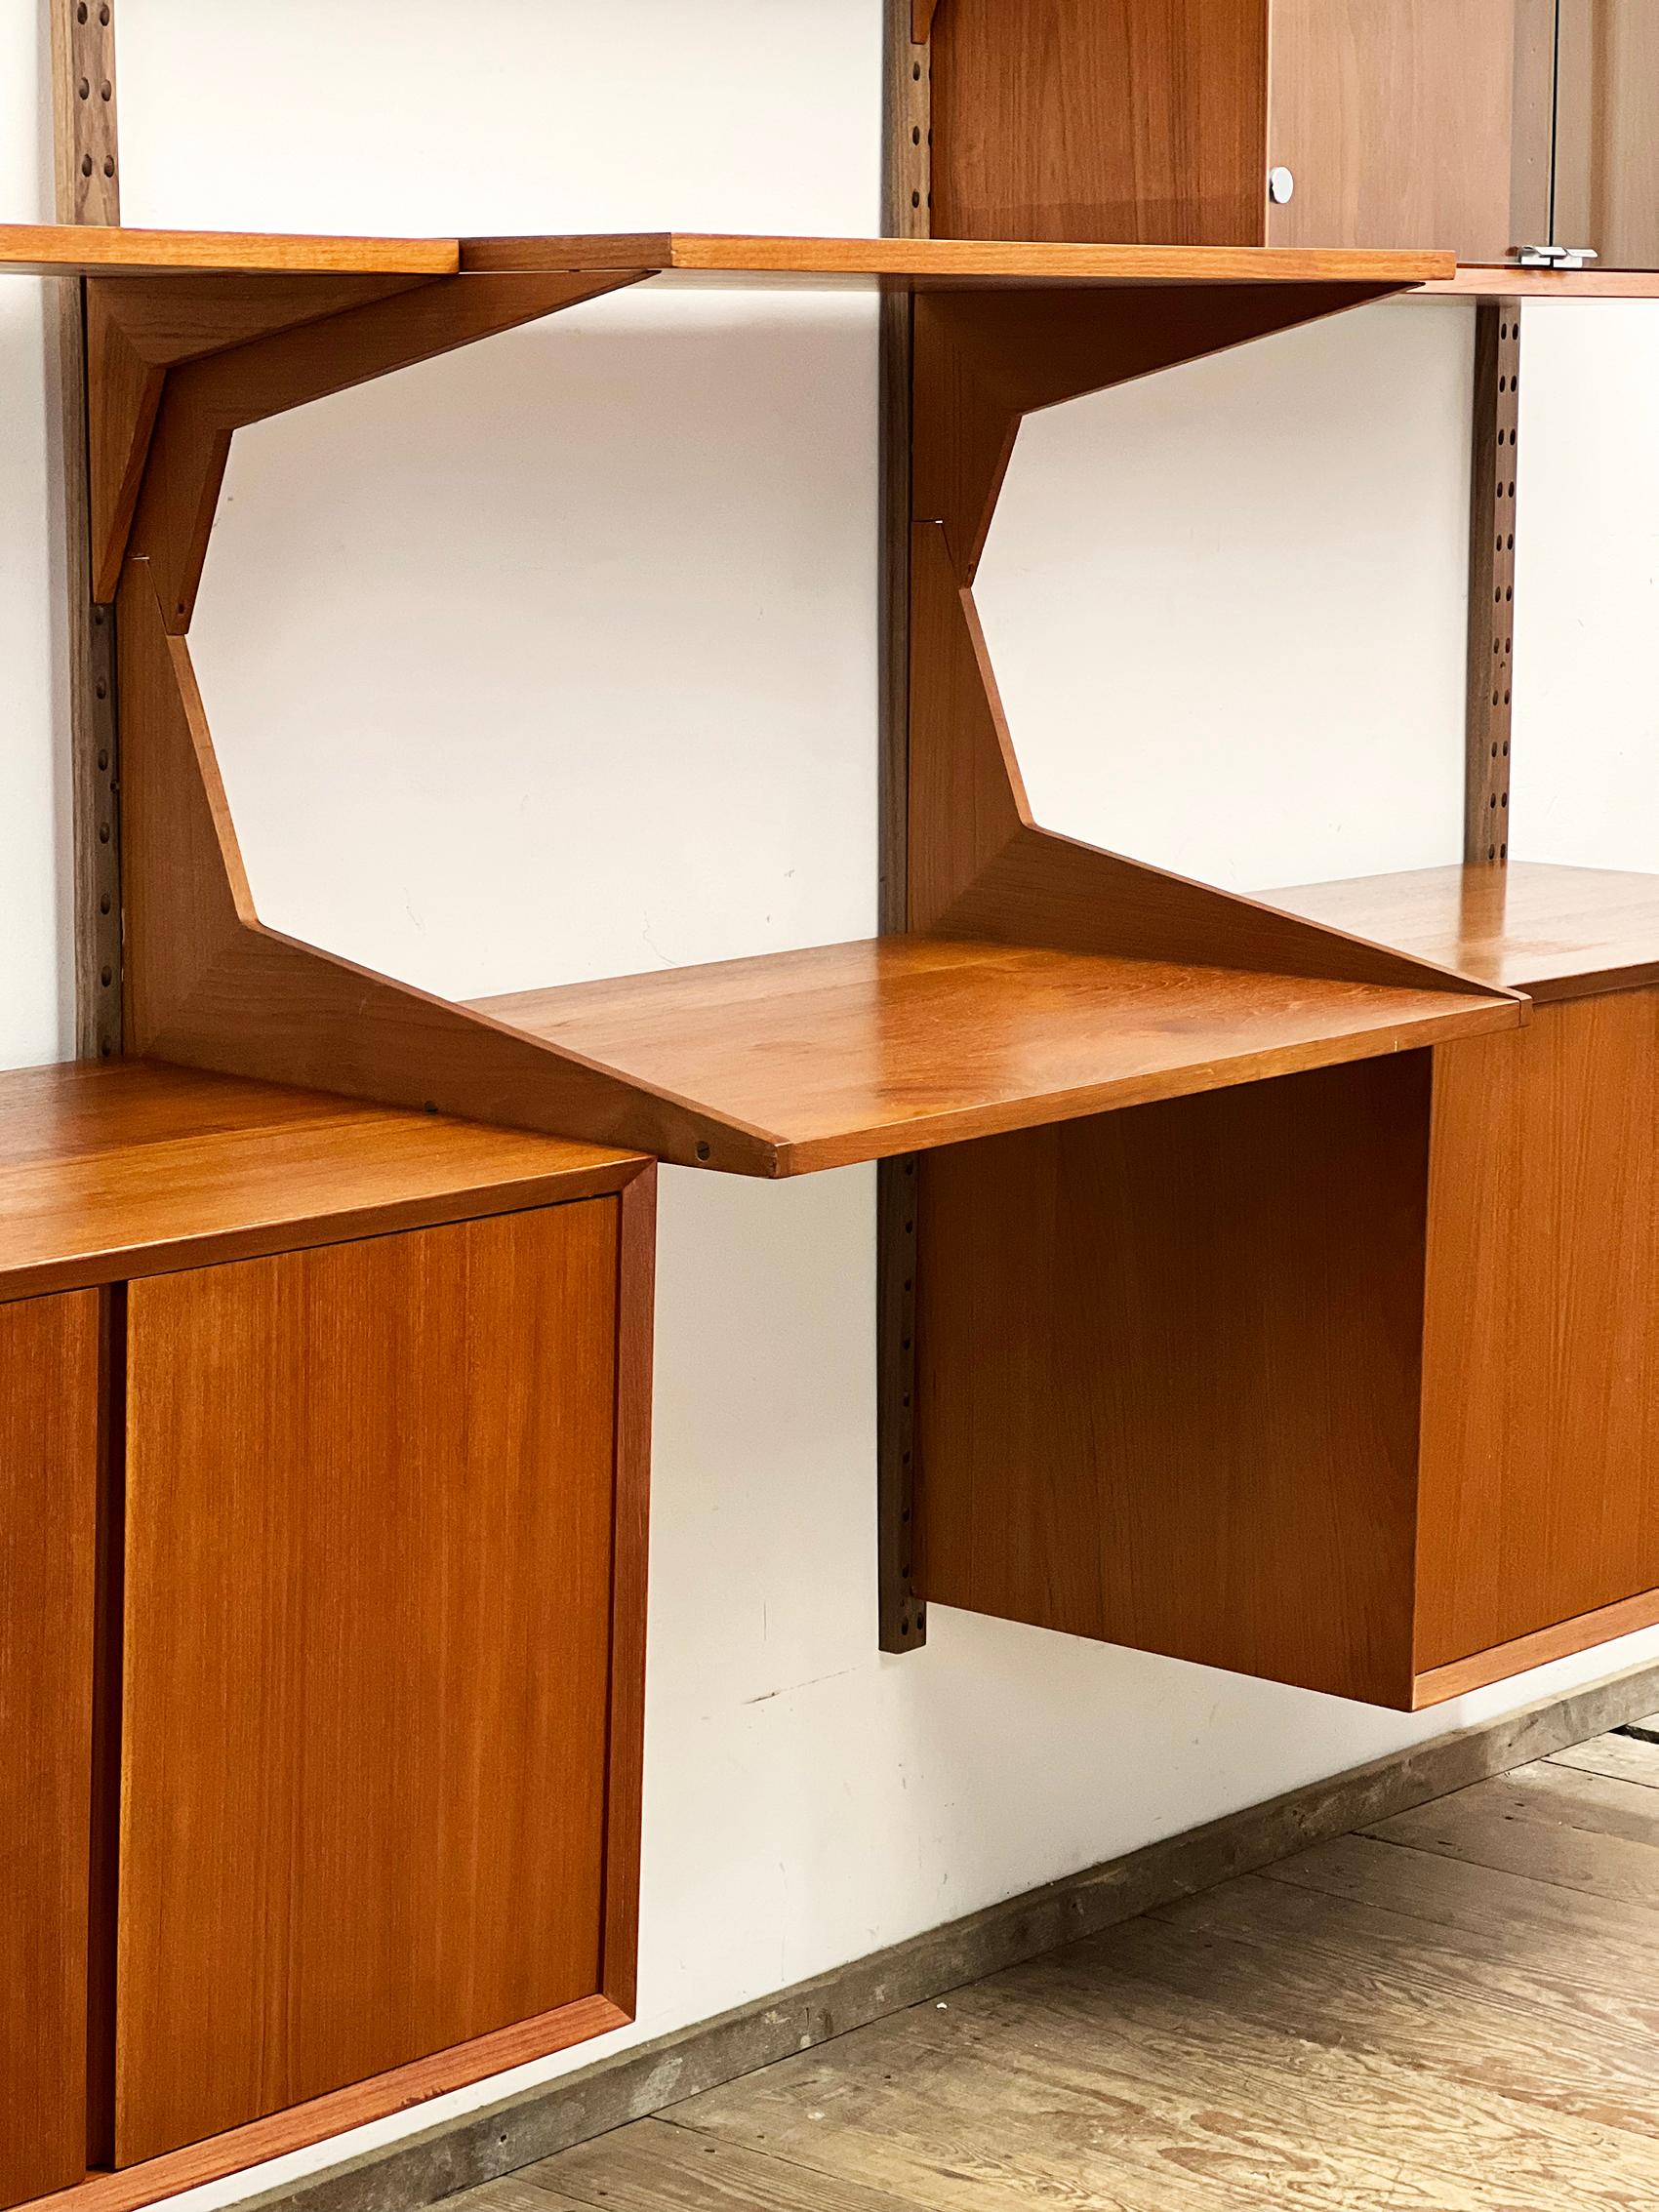 Vintage Poul Cadovius Wall Unit, Mid-Century Modern Shelf Royal System, Denmark In Good Condition For Sale In München, Bavaria